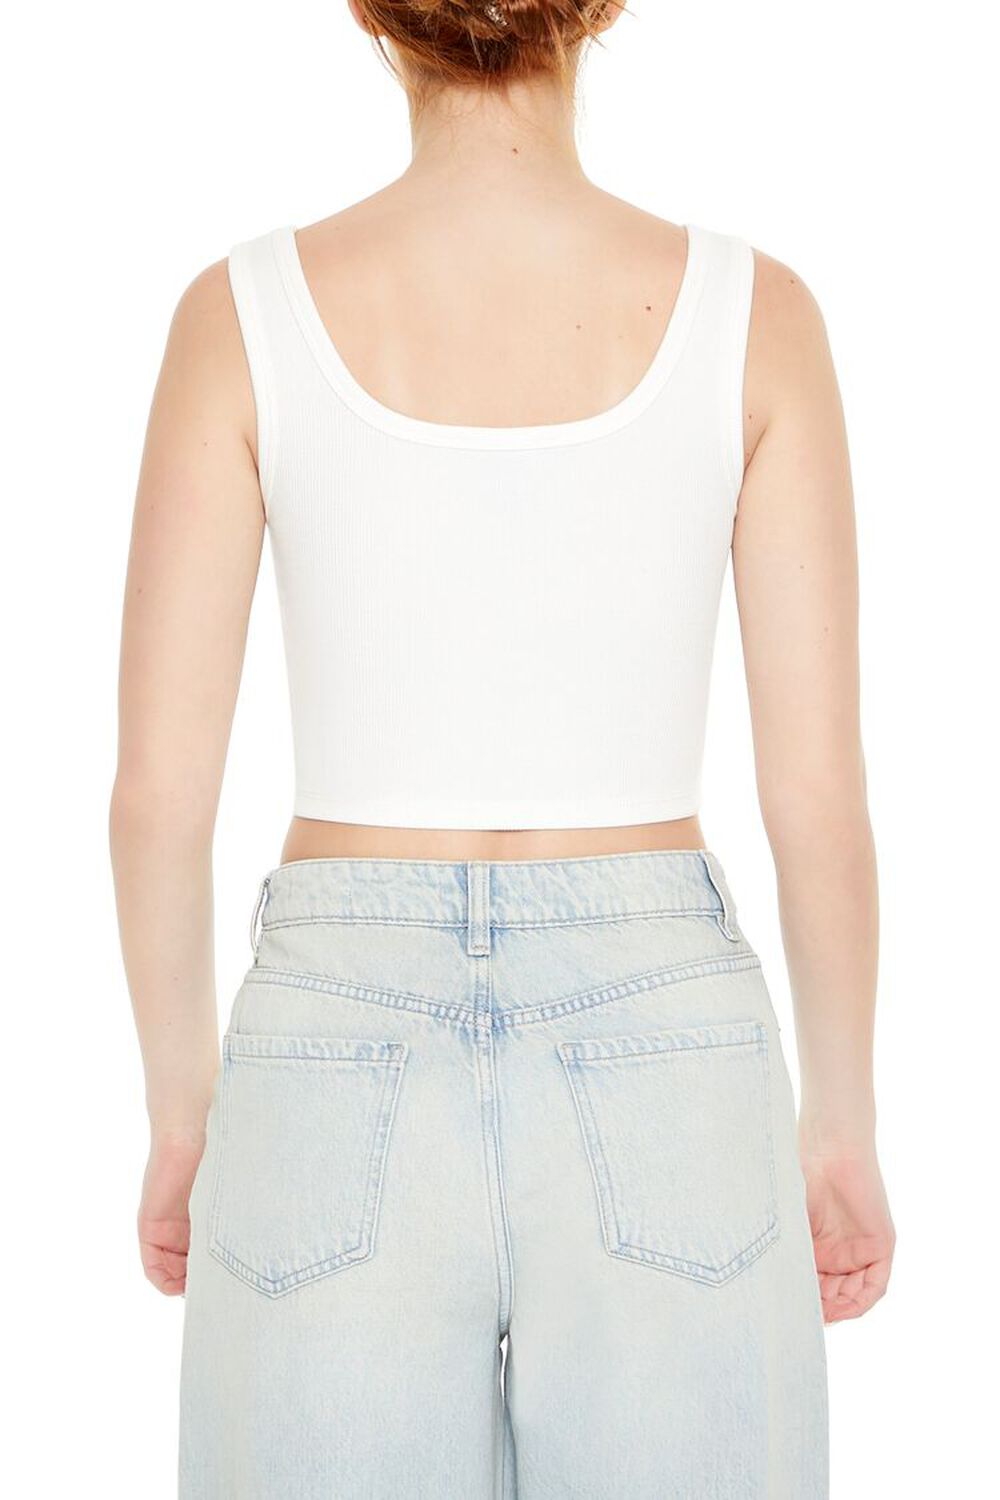 WHITE Cropped Bow Tank Top, image 3